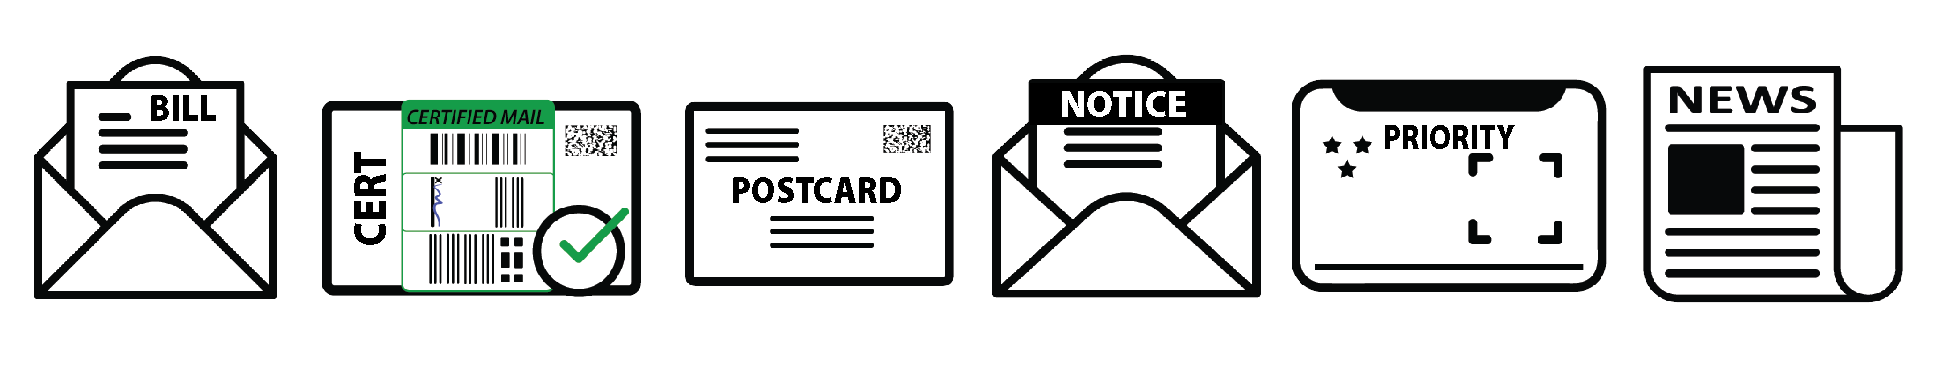 Utility bills, certified mail, postcards, notices, priority mail, newsletters and more can be mailed by Broadstrokeinc.com